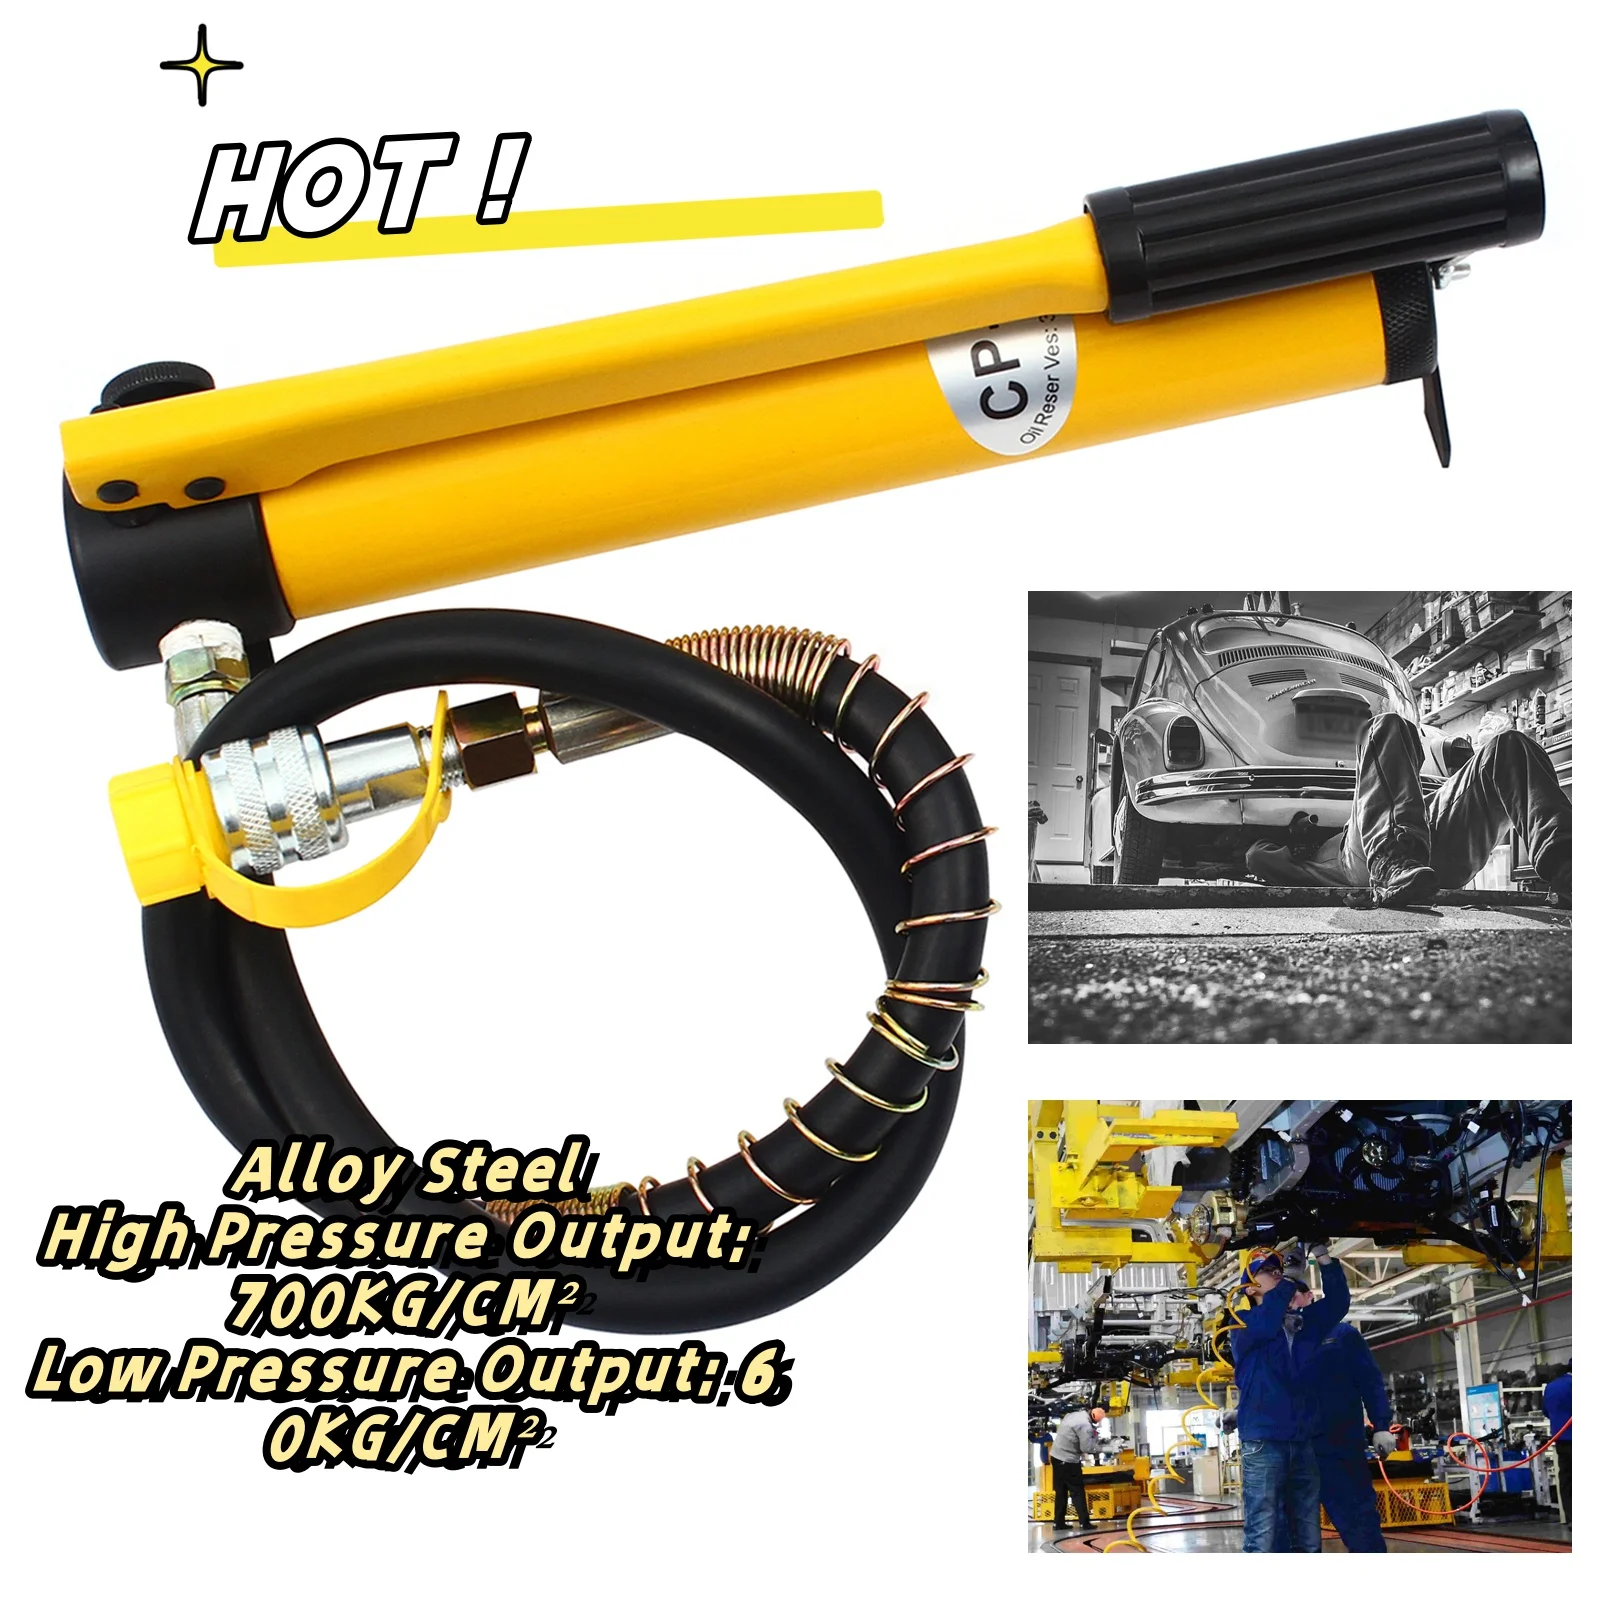 10 Ton Hydraulic Hand Pump High Pressure Hand Operated Pump w/ Steel Balls & Sealing Ring 10000Psi automobile air conditioning compressor high temp resistant sealing rubber ring r134a 265pcs o ring